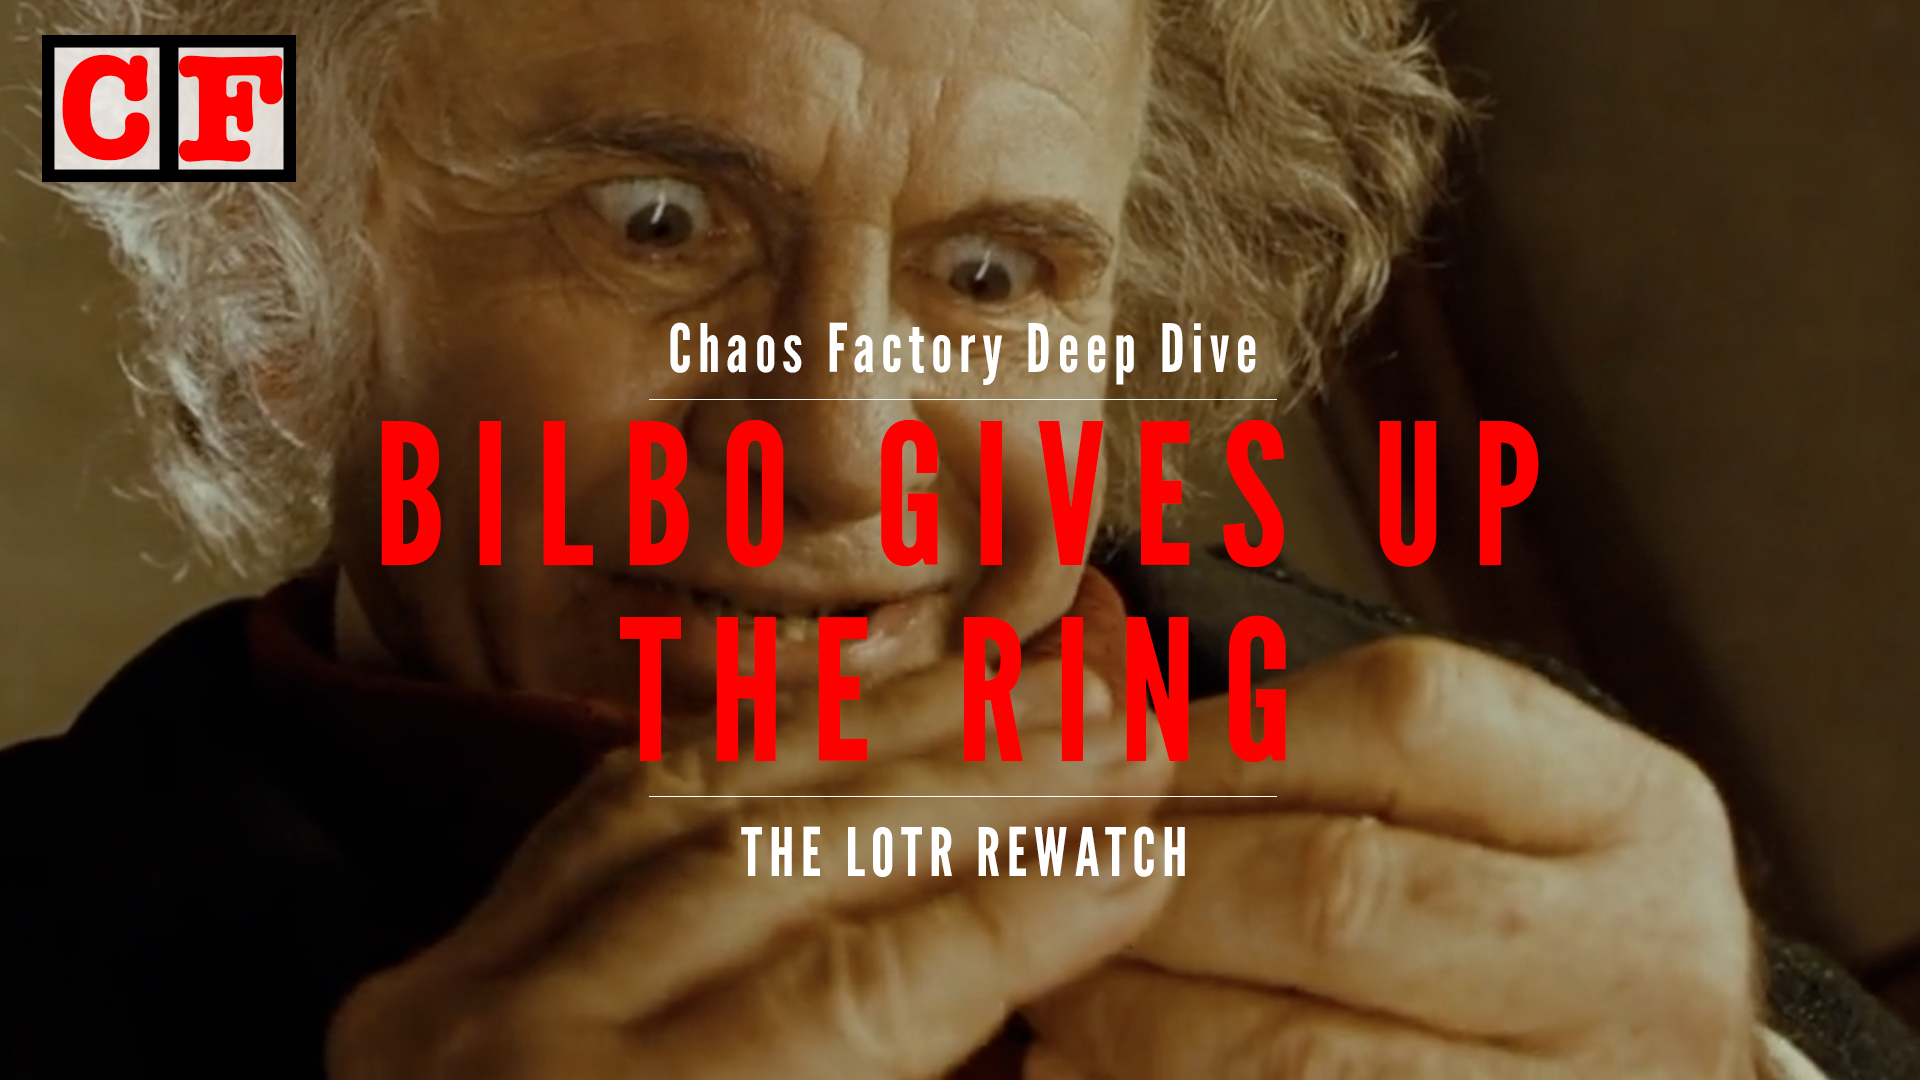 Bilbo Gives Up The Ring